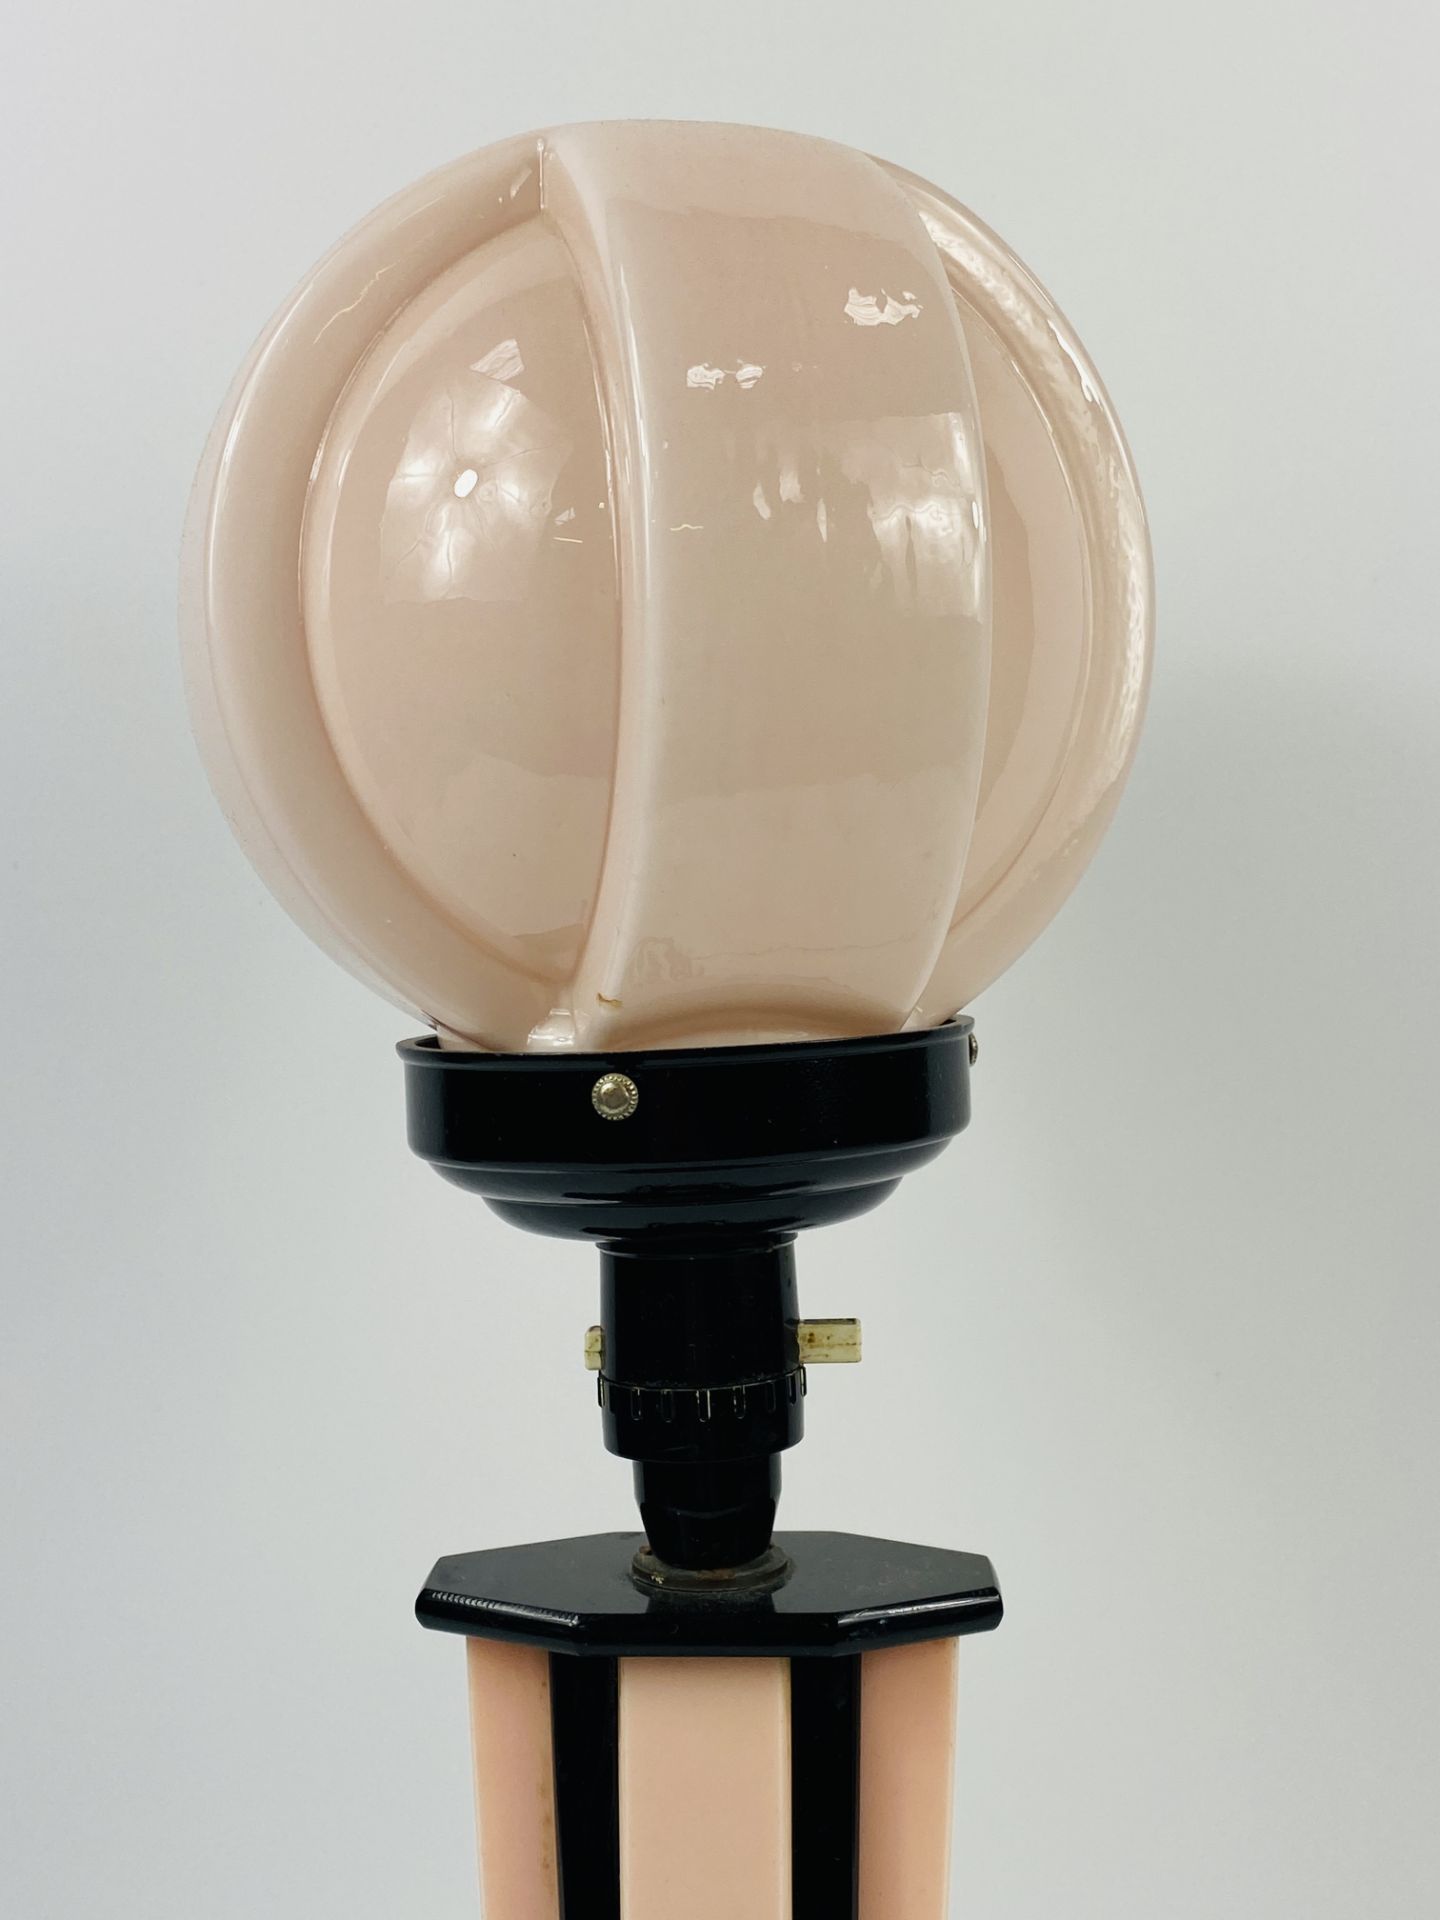 Art deco table lamp - Image 2 of 6